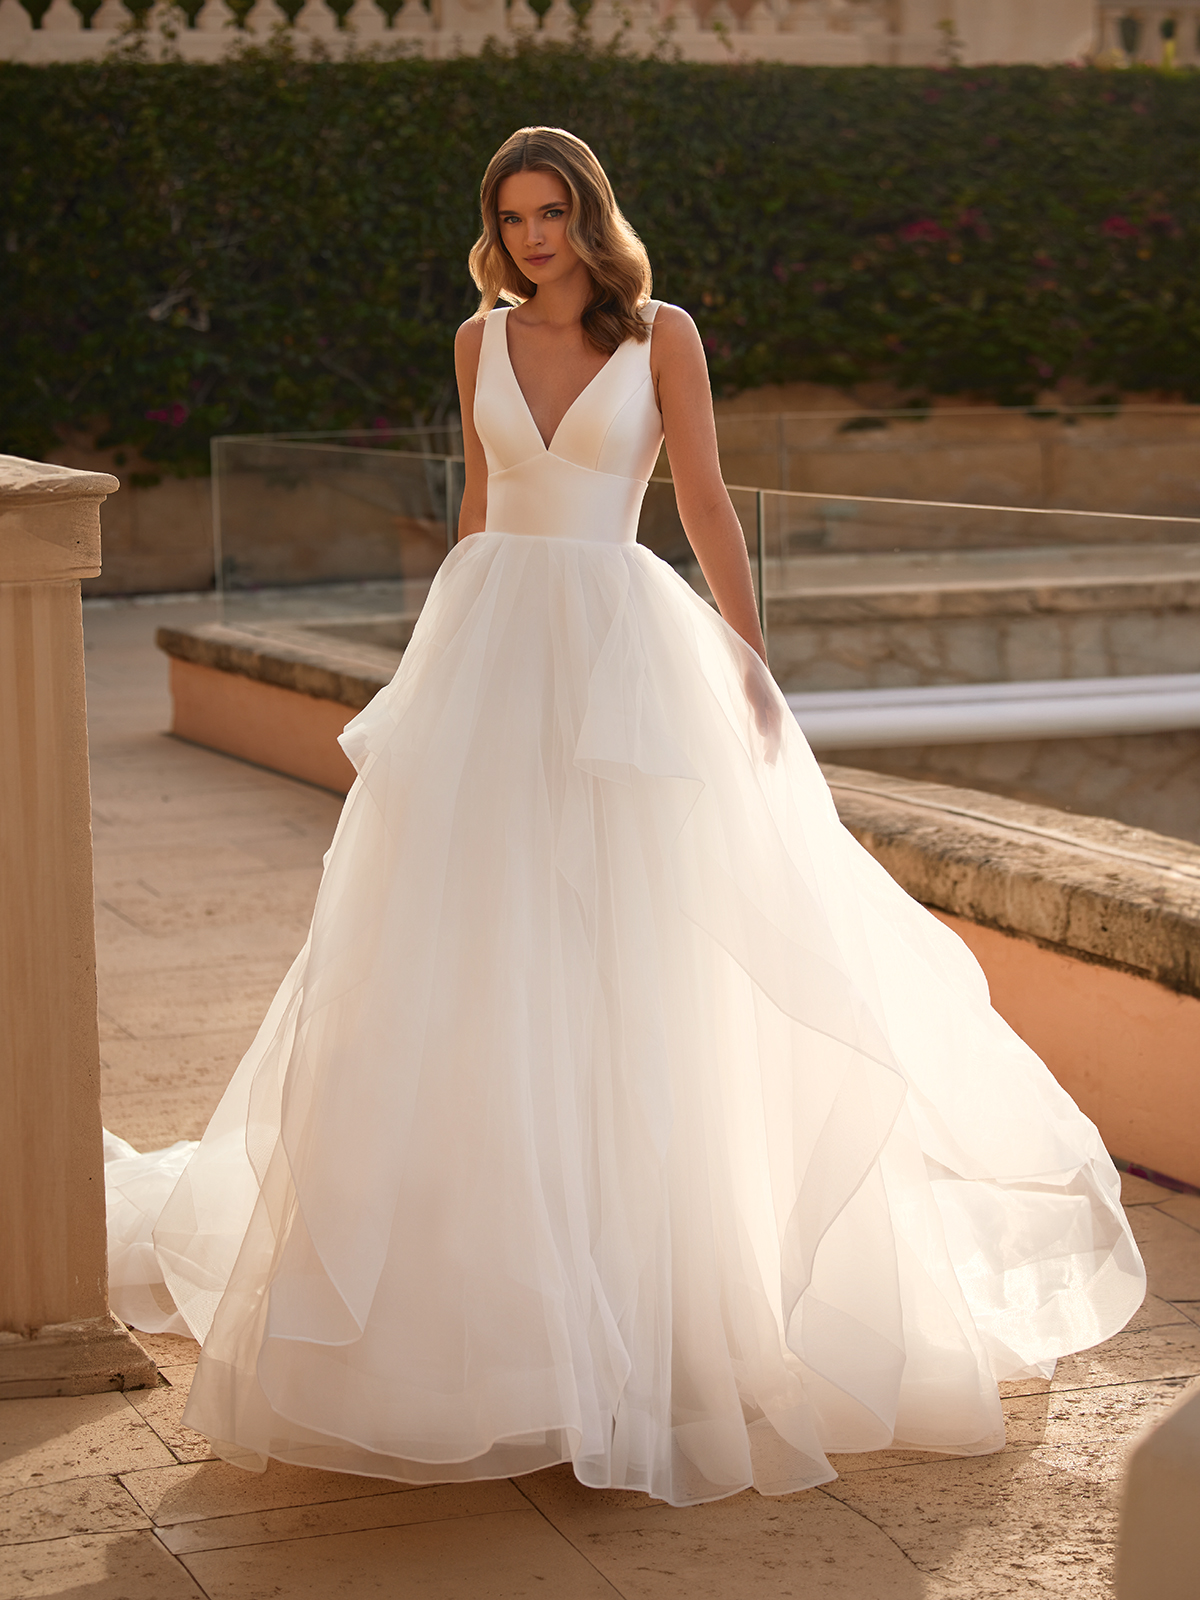 Wedding Dress Styles: 22 Shapes & Necklines You Need to Know -  hitched.co.uk - hitched.co.uk